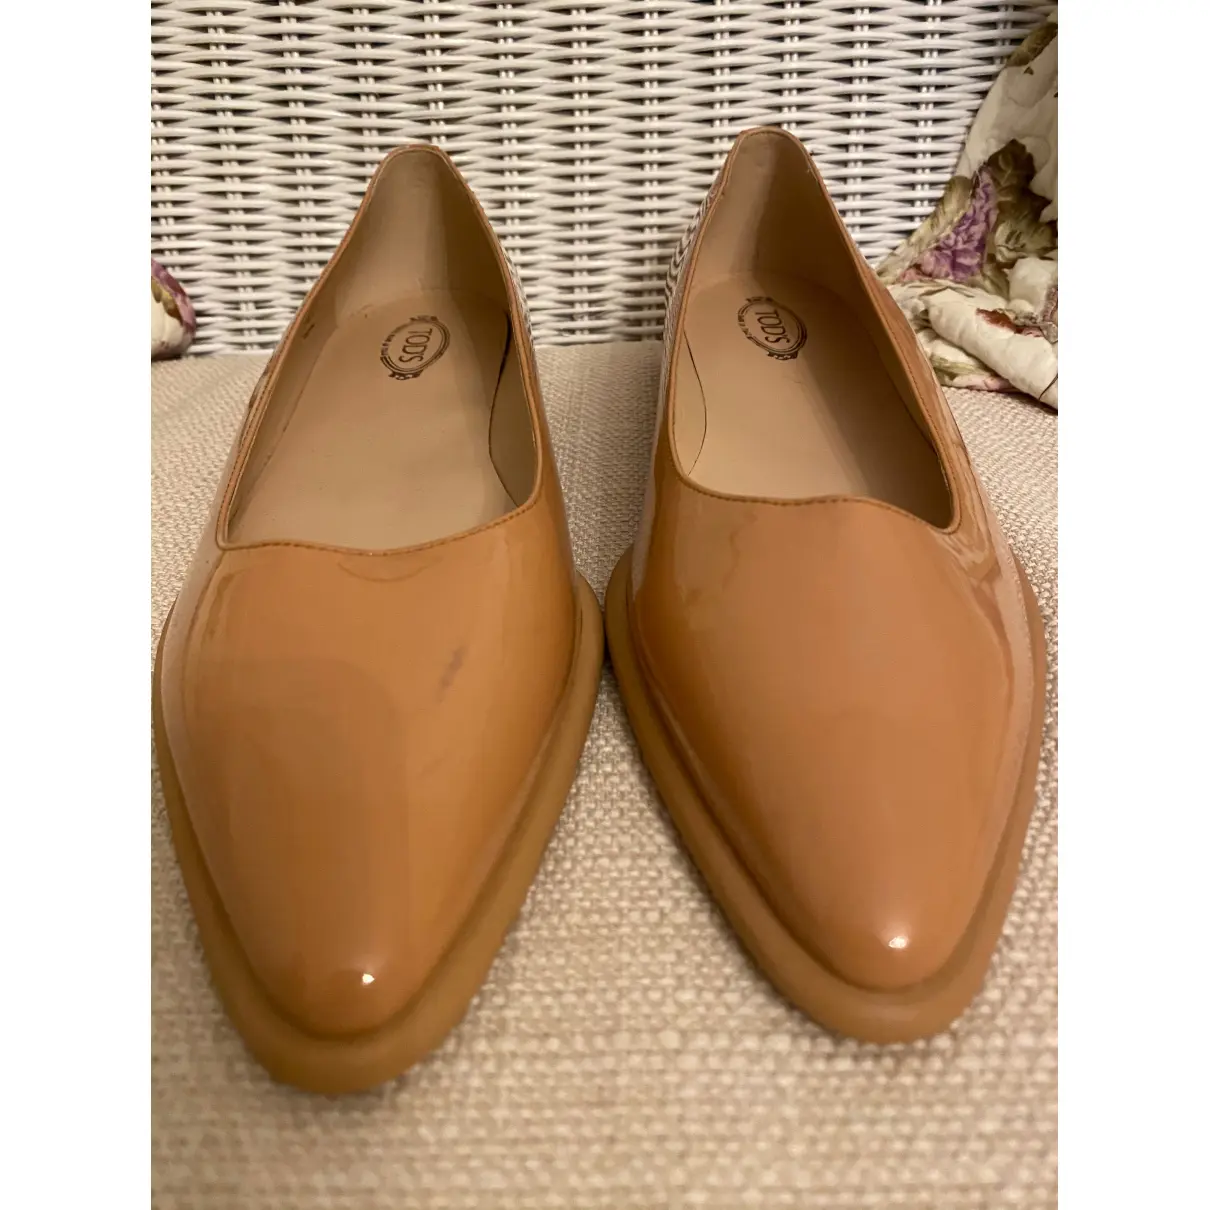 Buy Tod's Patent leather ballet flats online